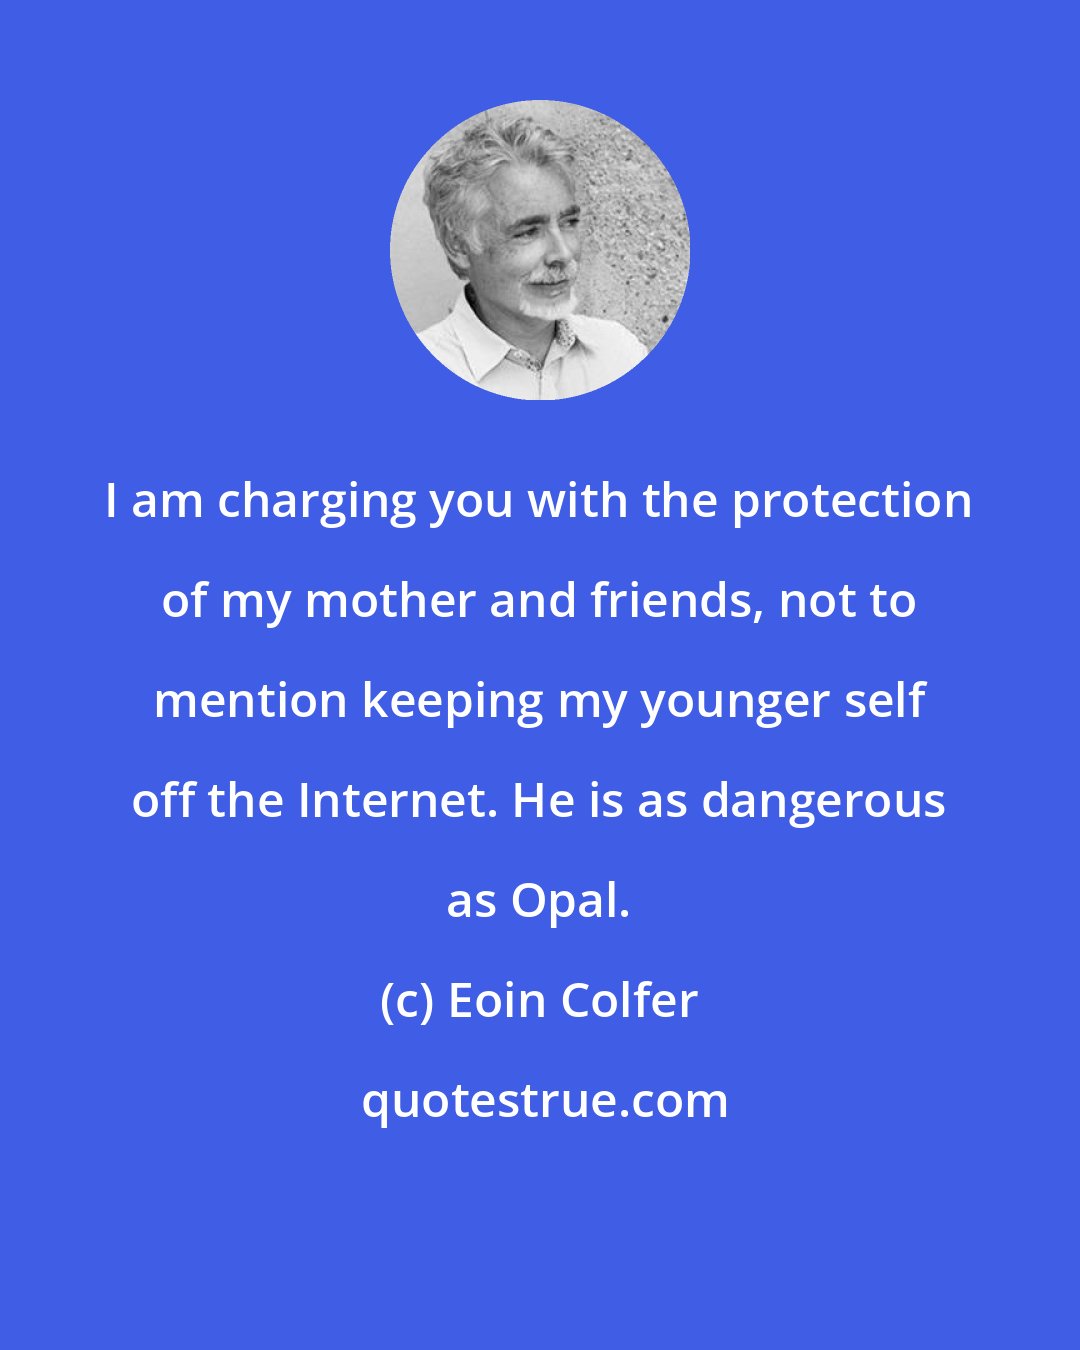 Eoin Colfer: I am charging you with the protection of my mother and friends, not to mention keeping my younger self off the Internet. He is as dangerous as Opal.